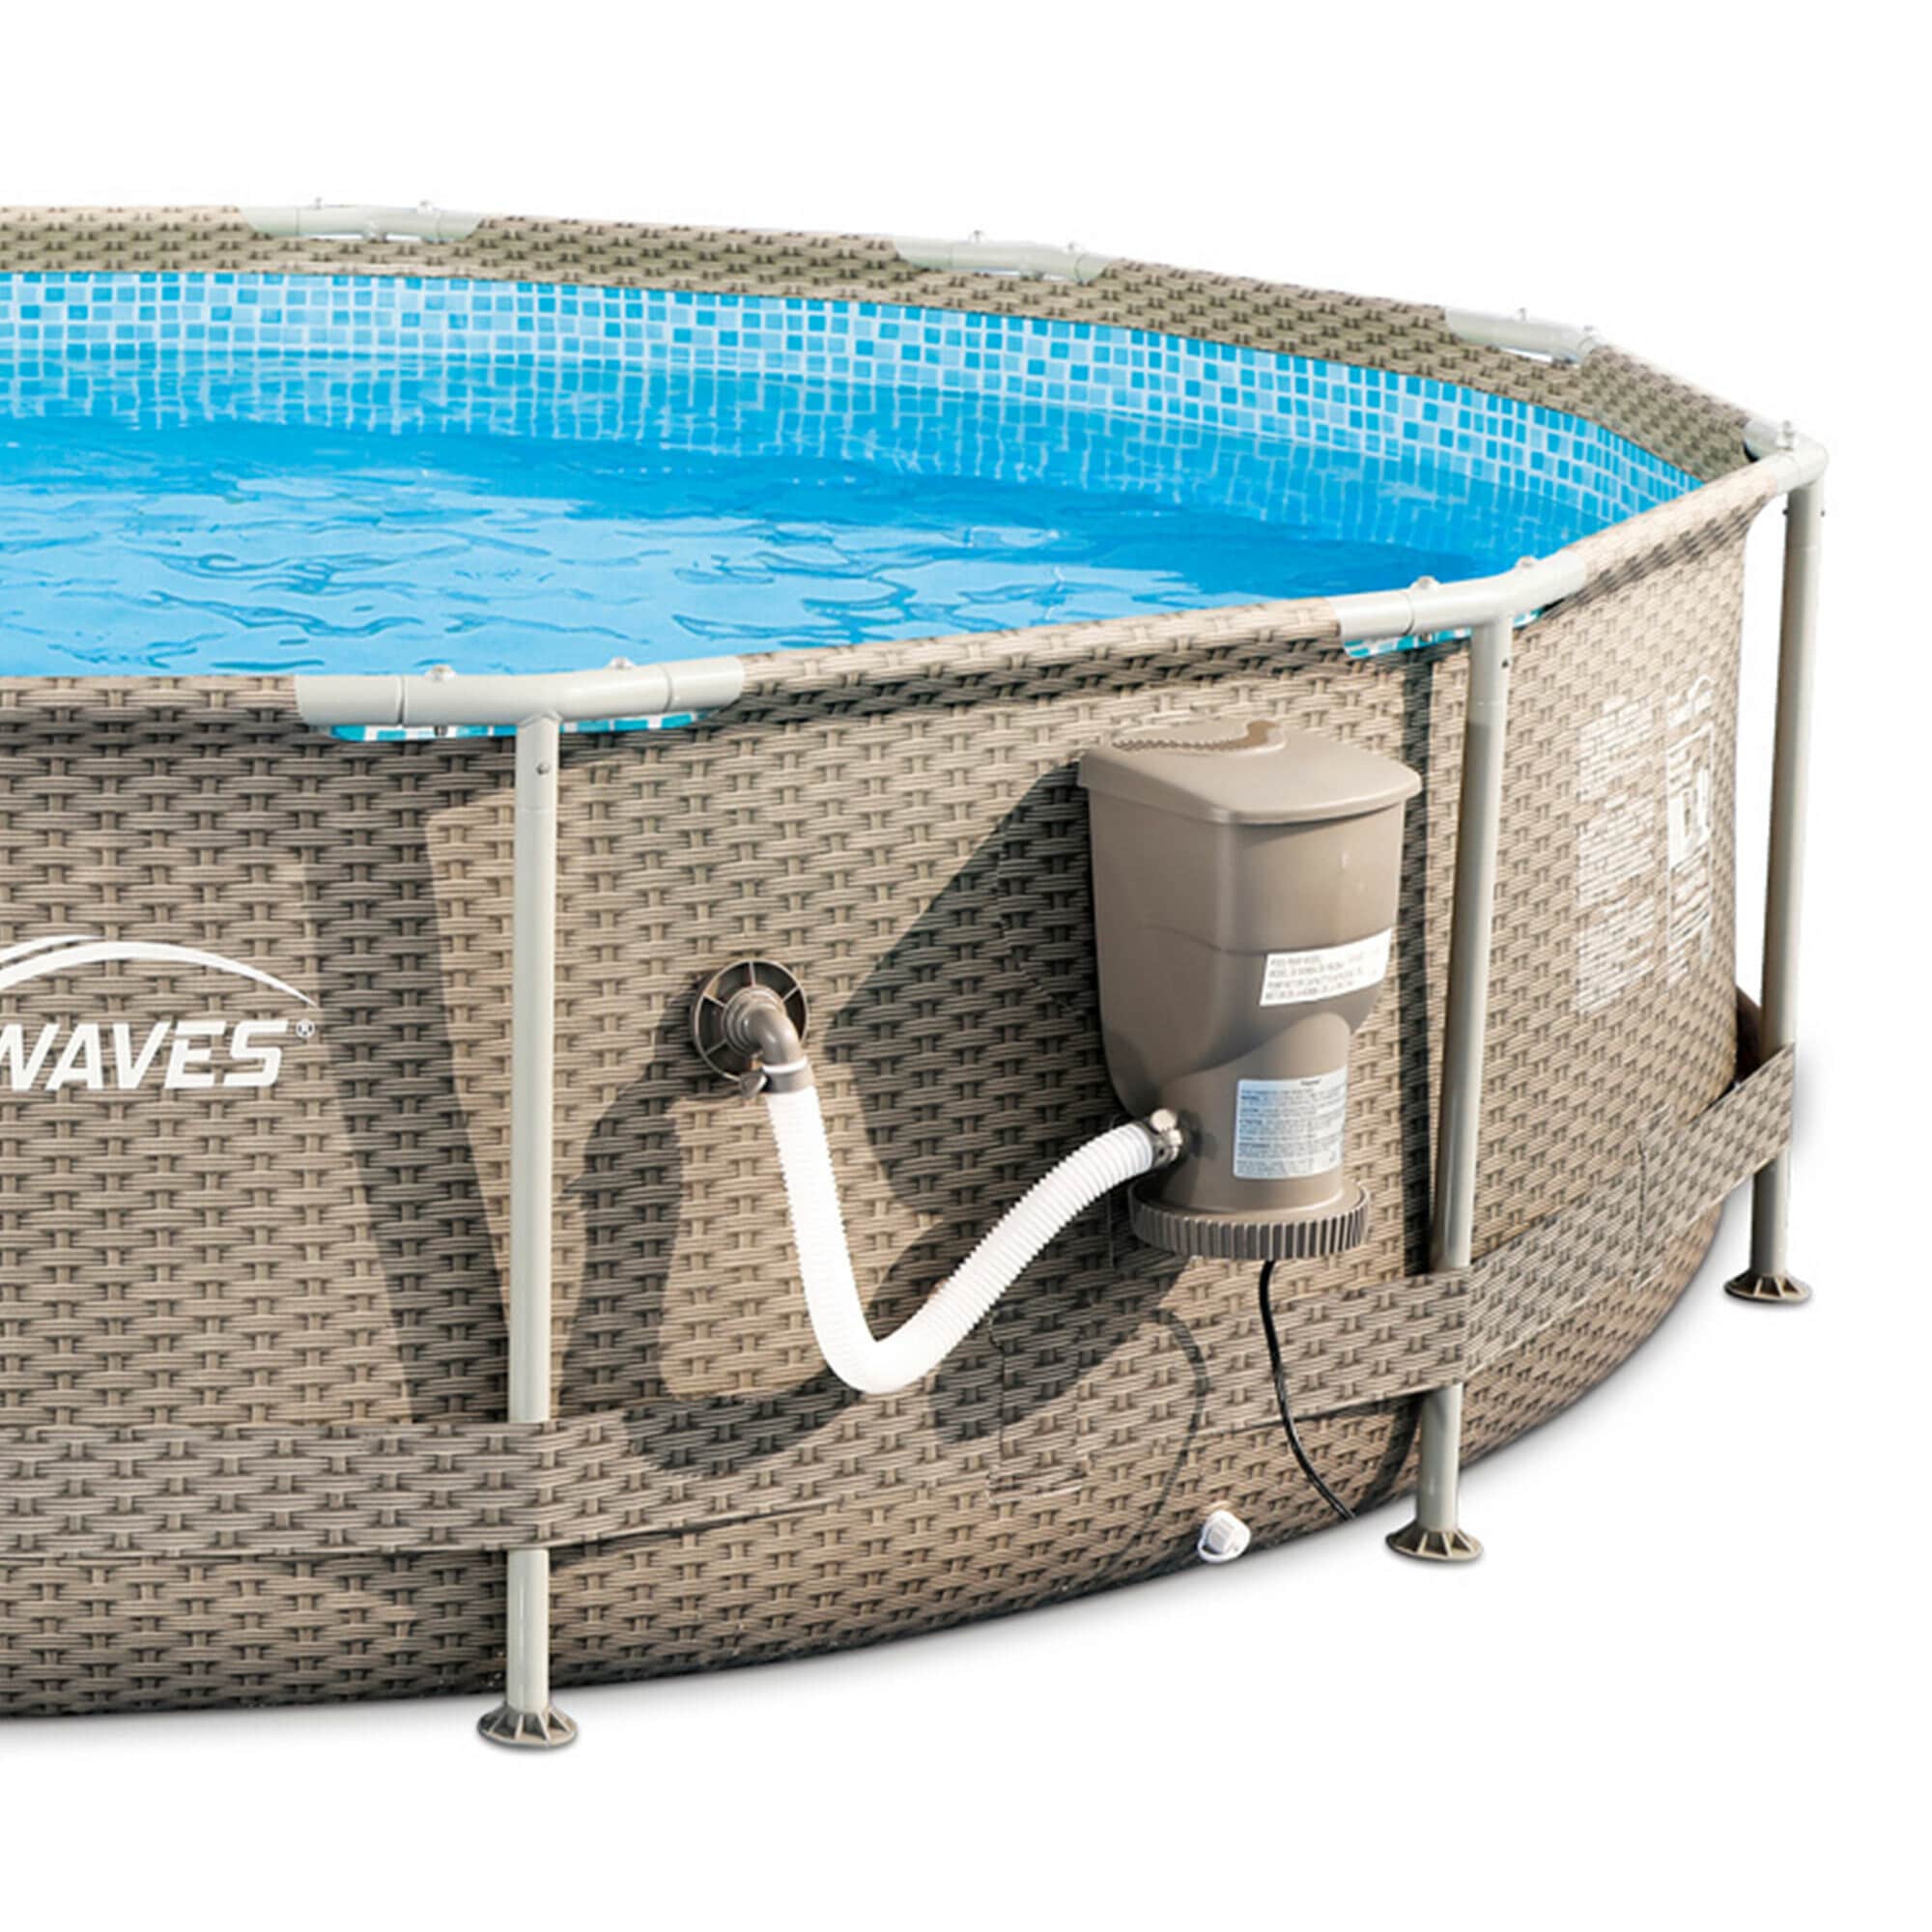 at 30-in 12-ft Waves Pool Filter 12-ft with Summer x Above-Ground Metal Frame x Round Pump